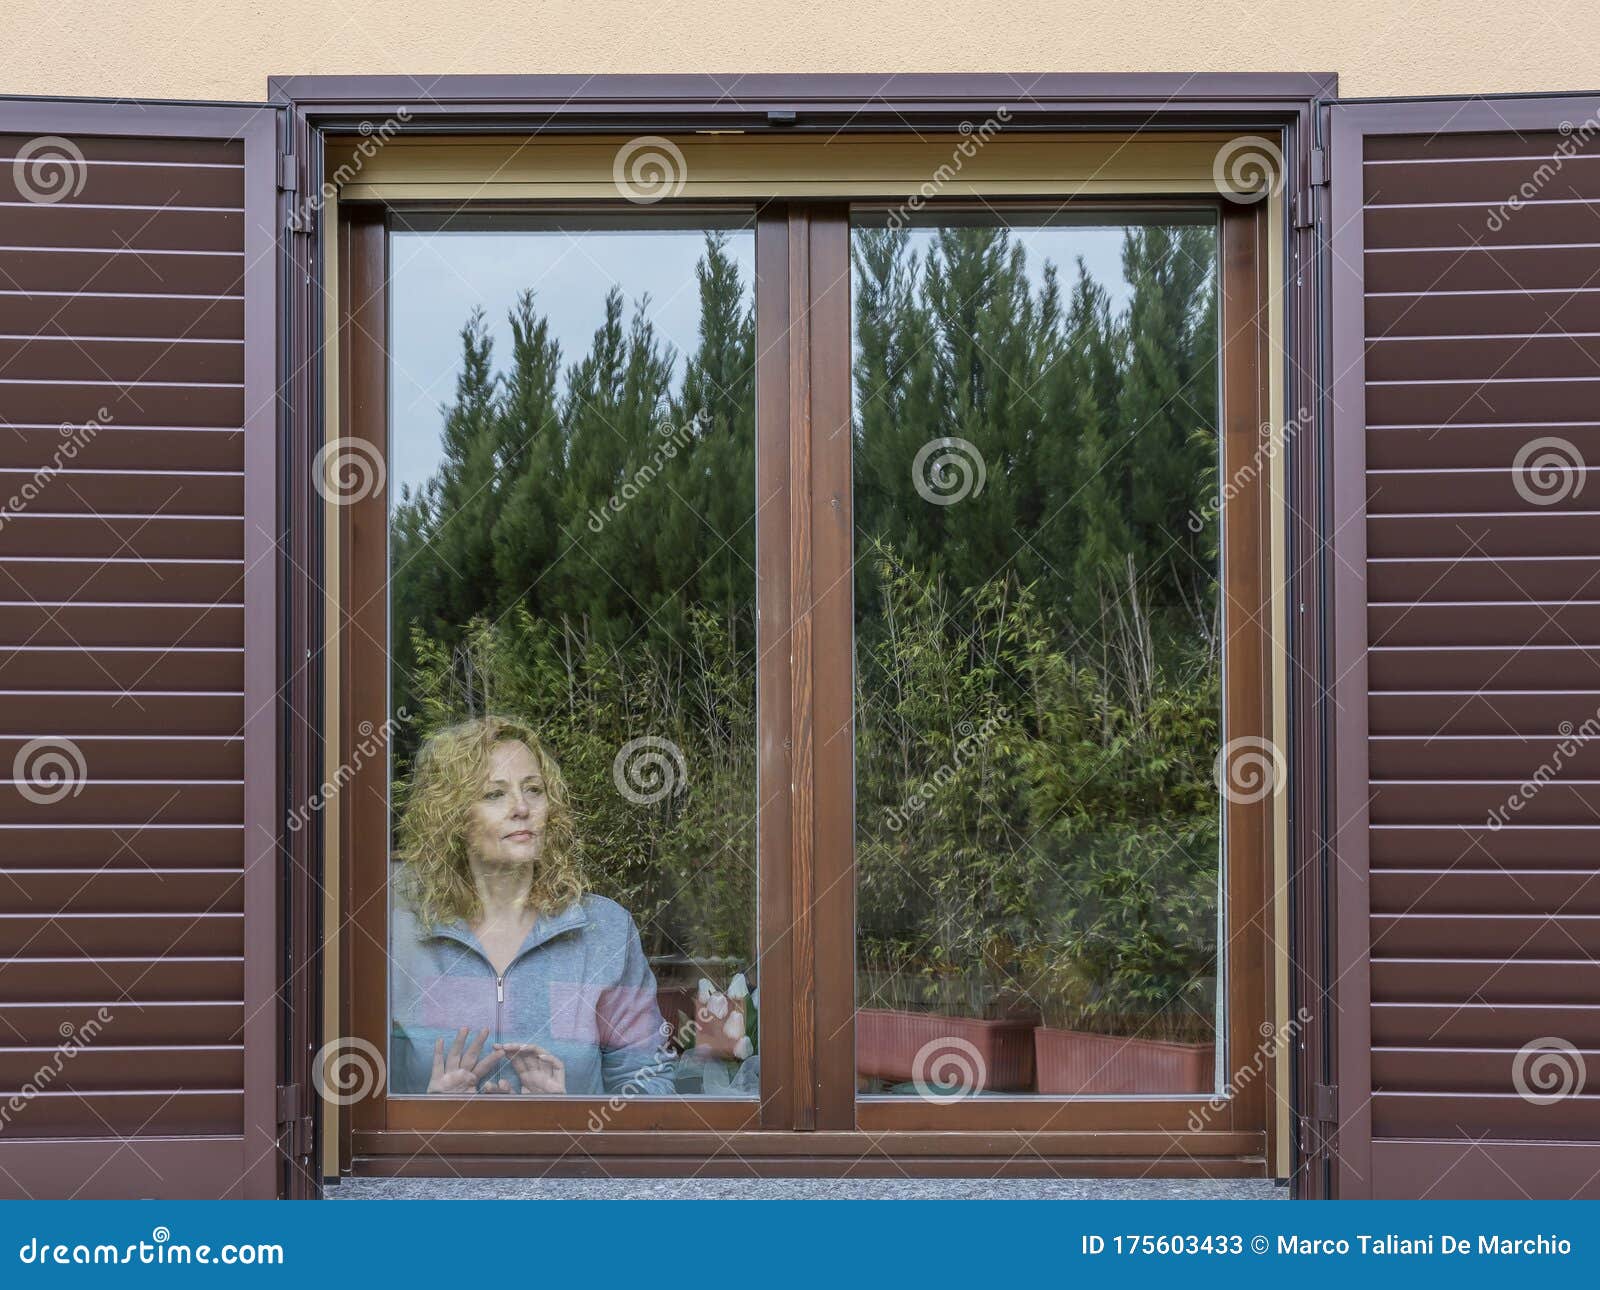 An Italian Blonde Woman Forced To Stay Indoors because of Coronavirus ...